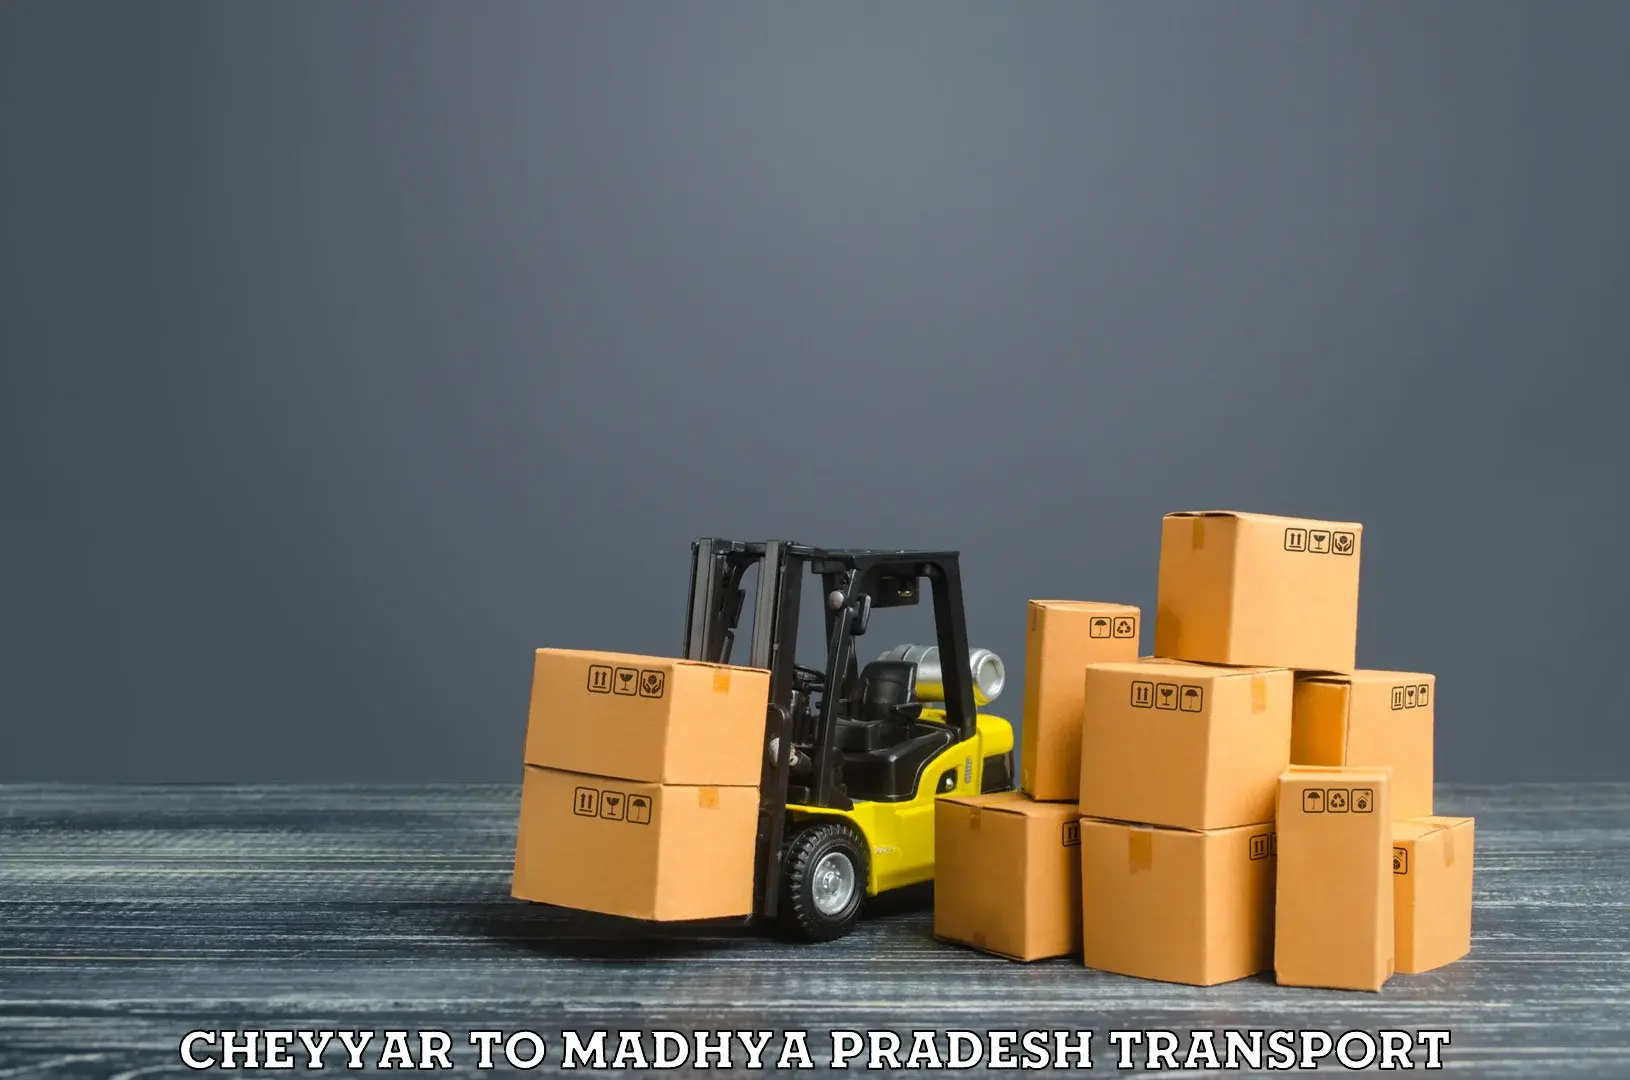 Container transport service Cheyyar to Gotegaon